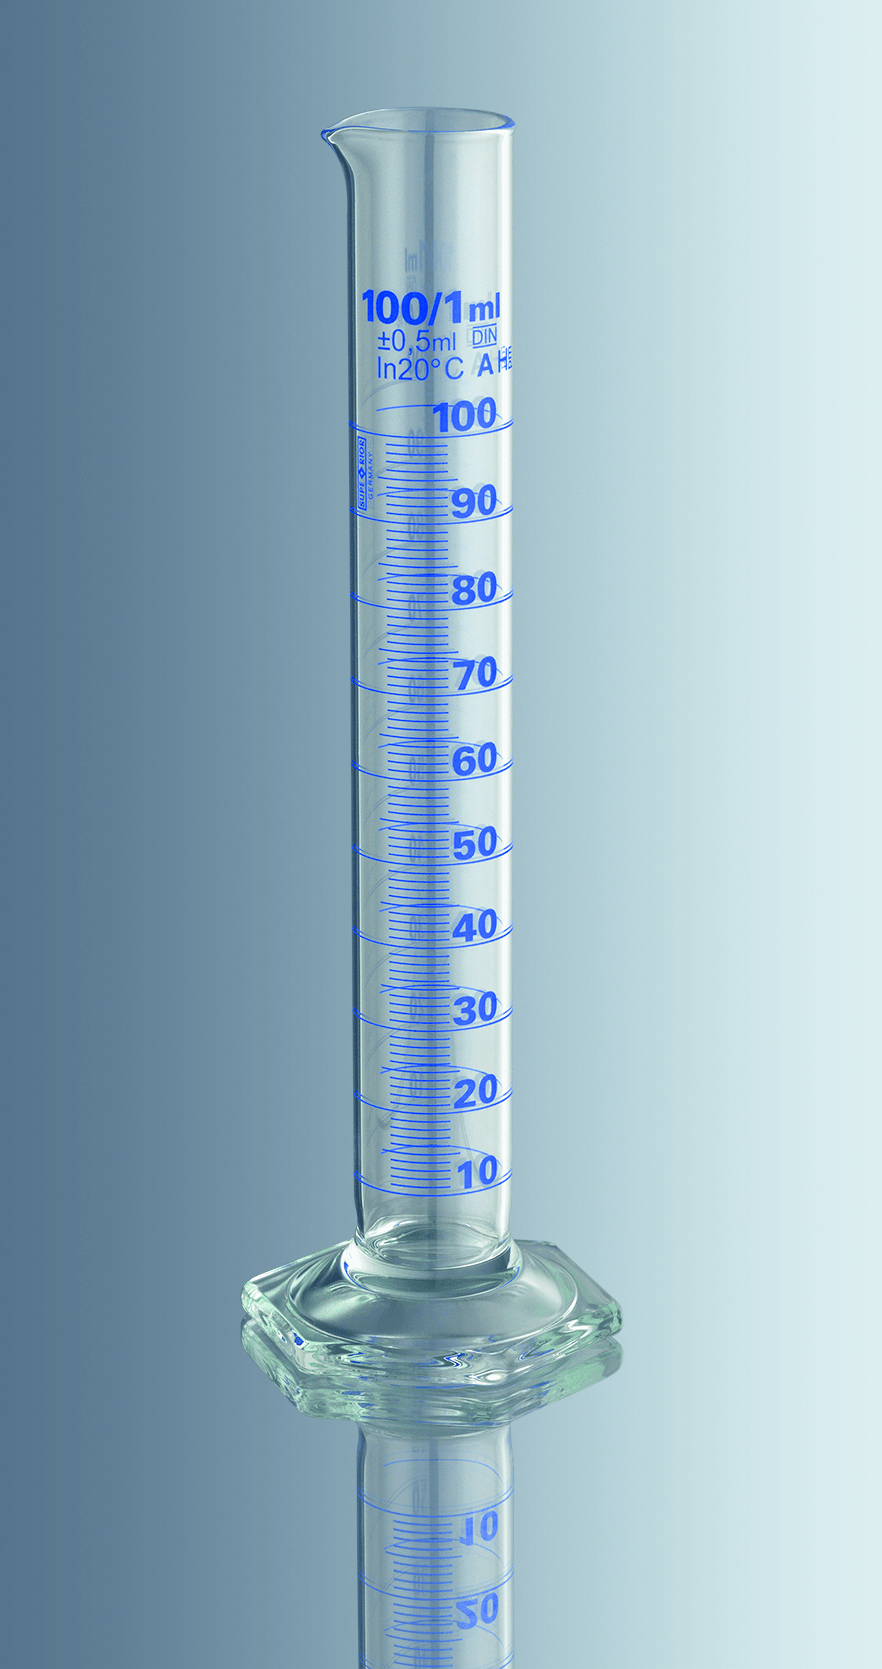 Marienfeld (Germany) Measuring Cylinder 50ml Class A(Lot Certified) - Hex base, High quality Borosil.Glass